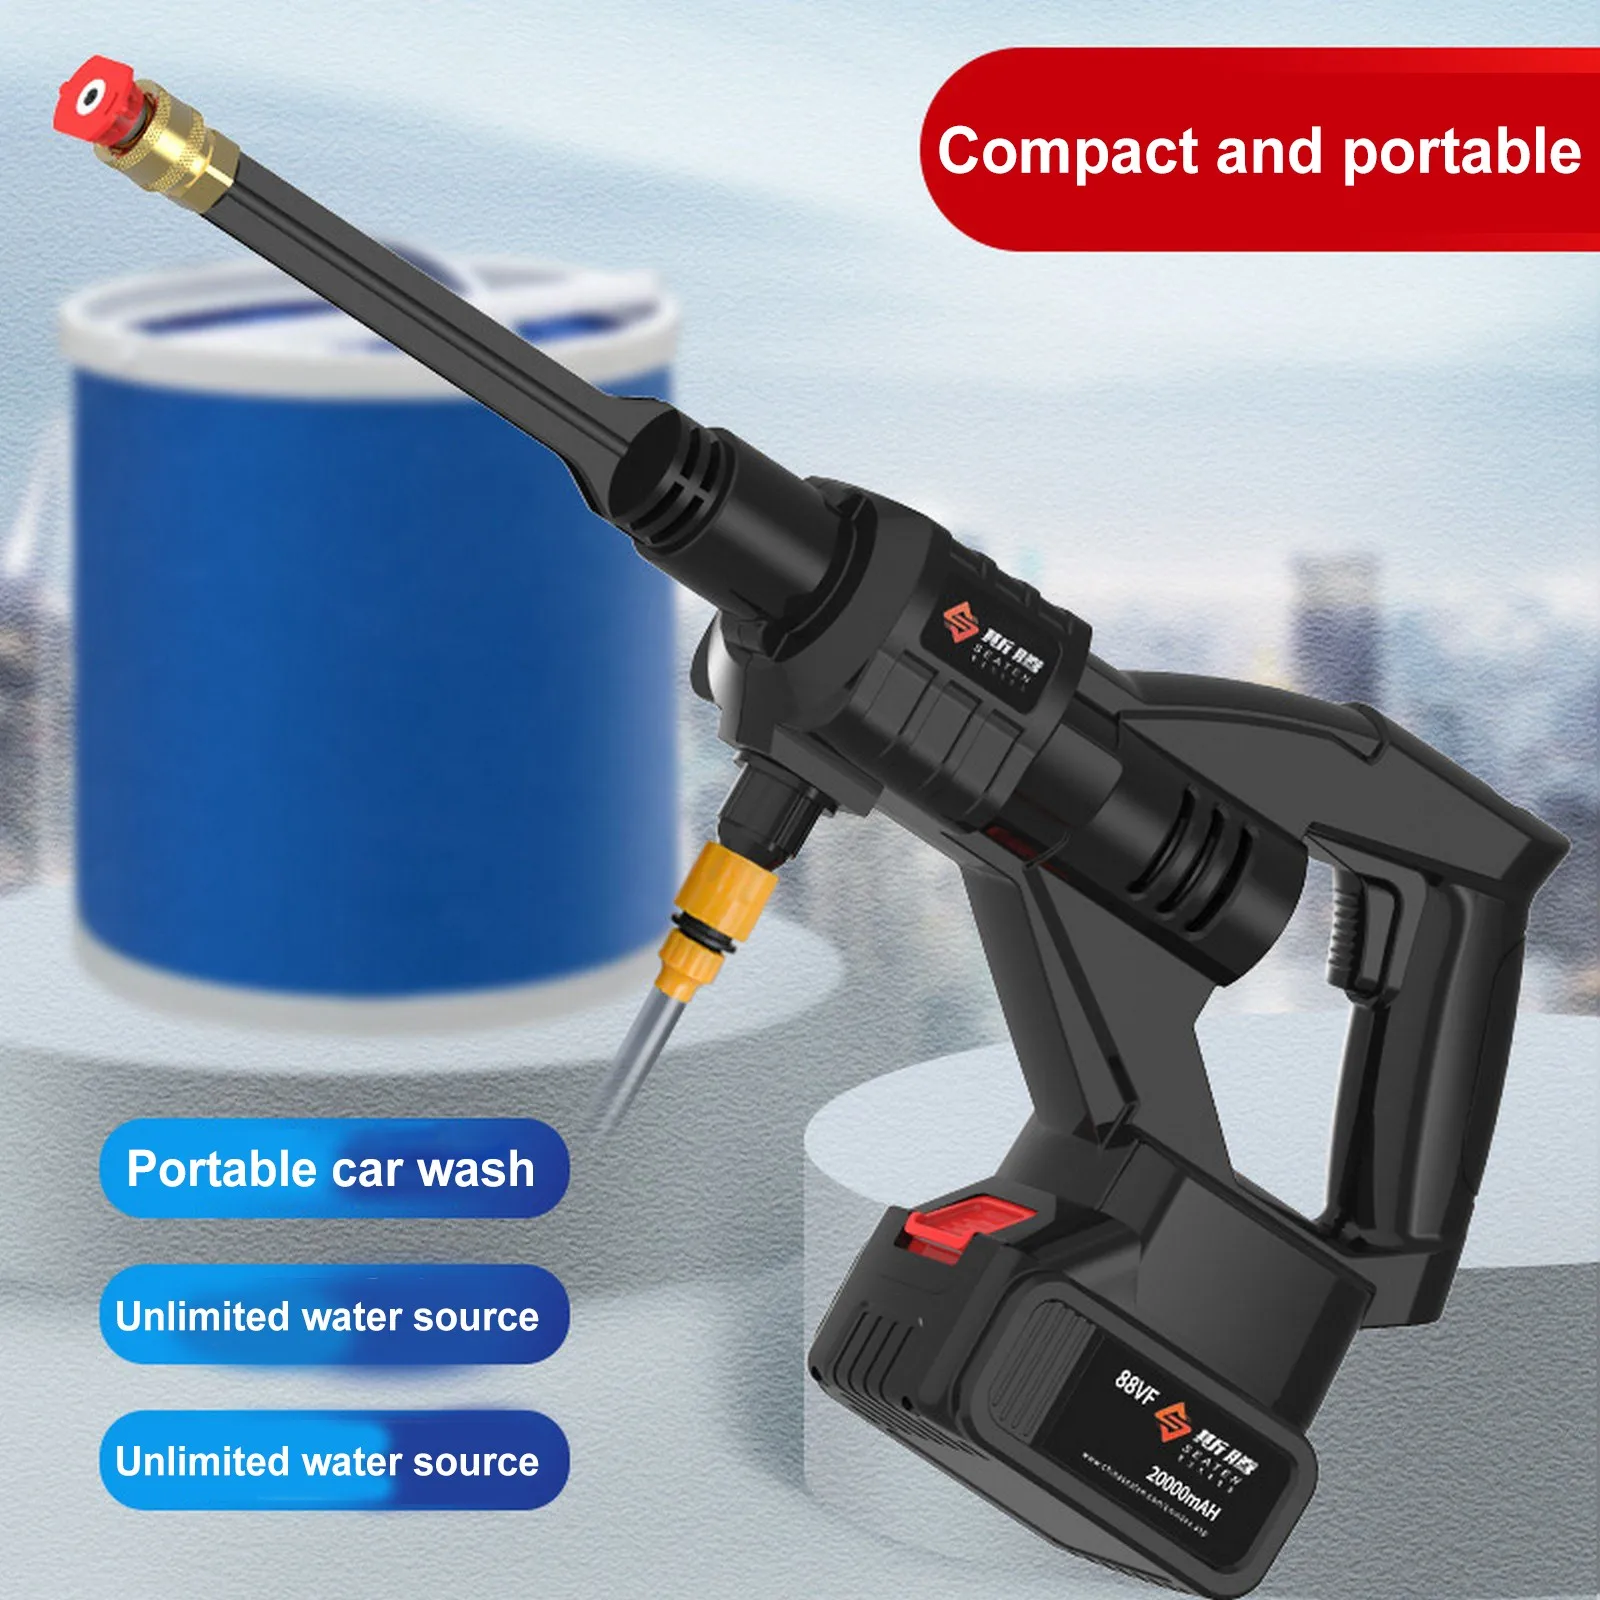 Cordless Pressure Washer 580 PSI Power Washer Cleaner 40000mAh Dual Batteries 5-in-1 Adjustable Nozzle Washer Spray Water Gun